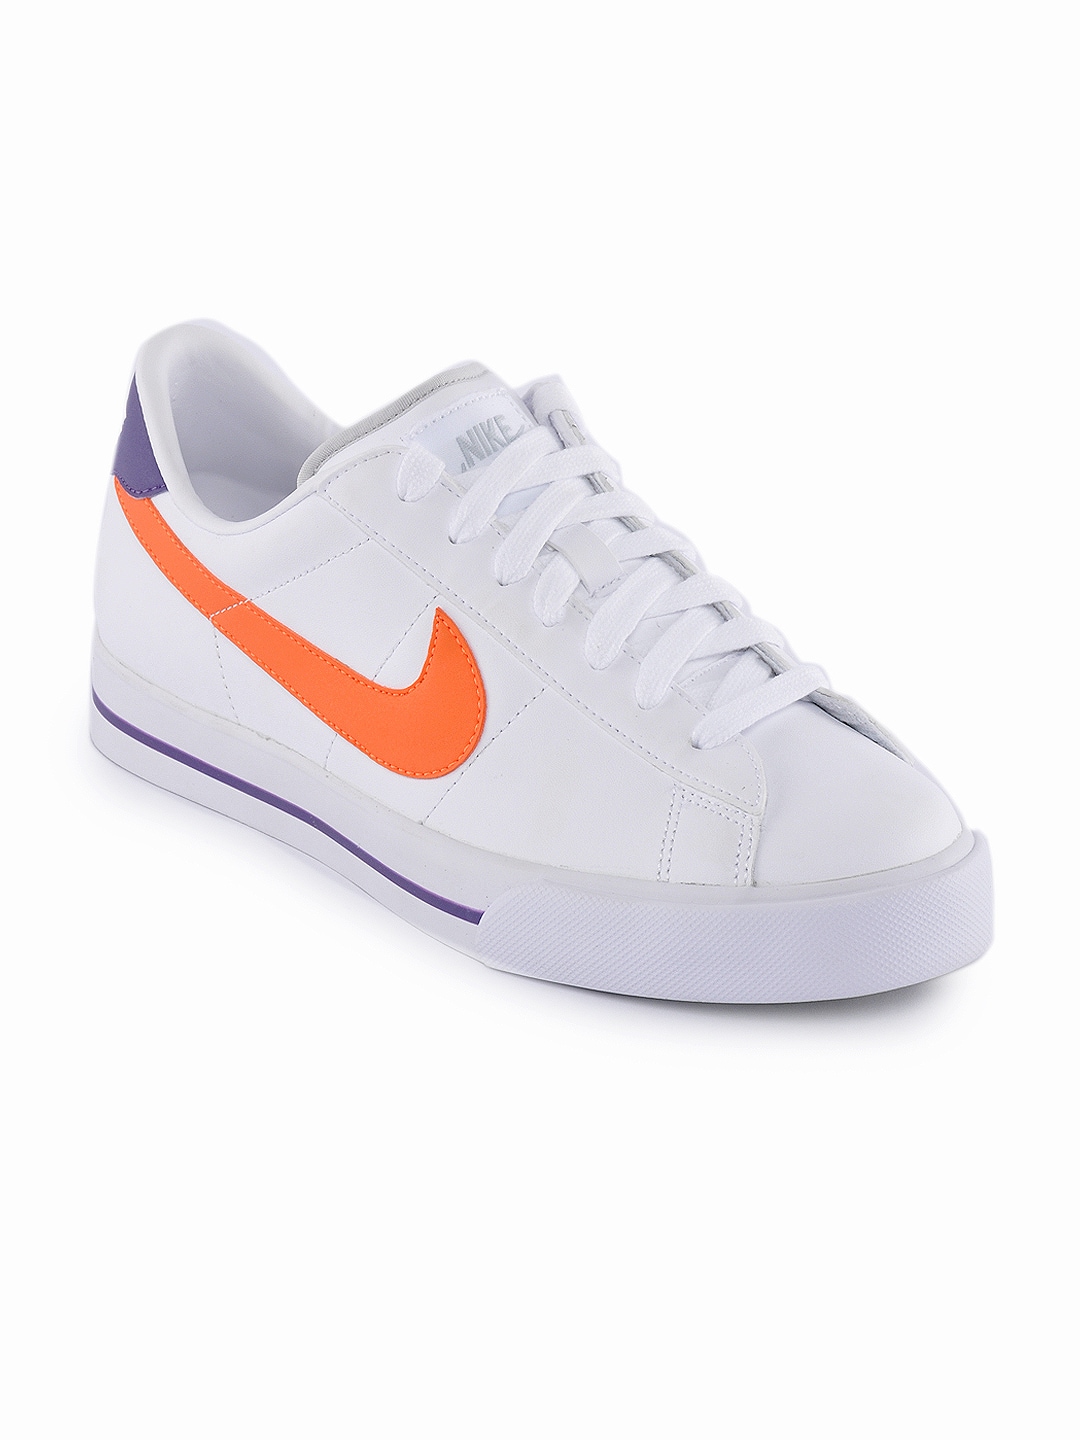 Nike Men White Sweet Classic Leather Shoes